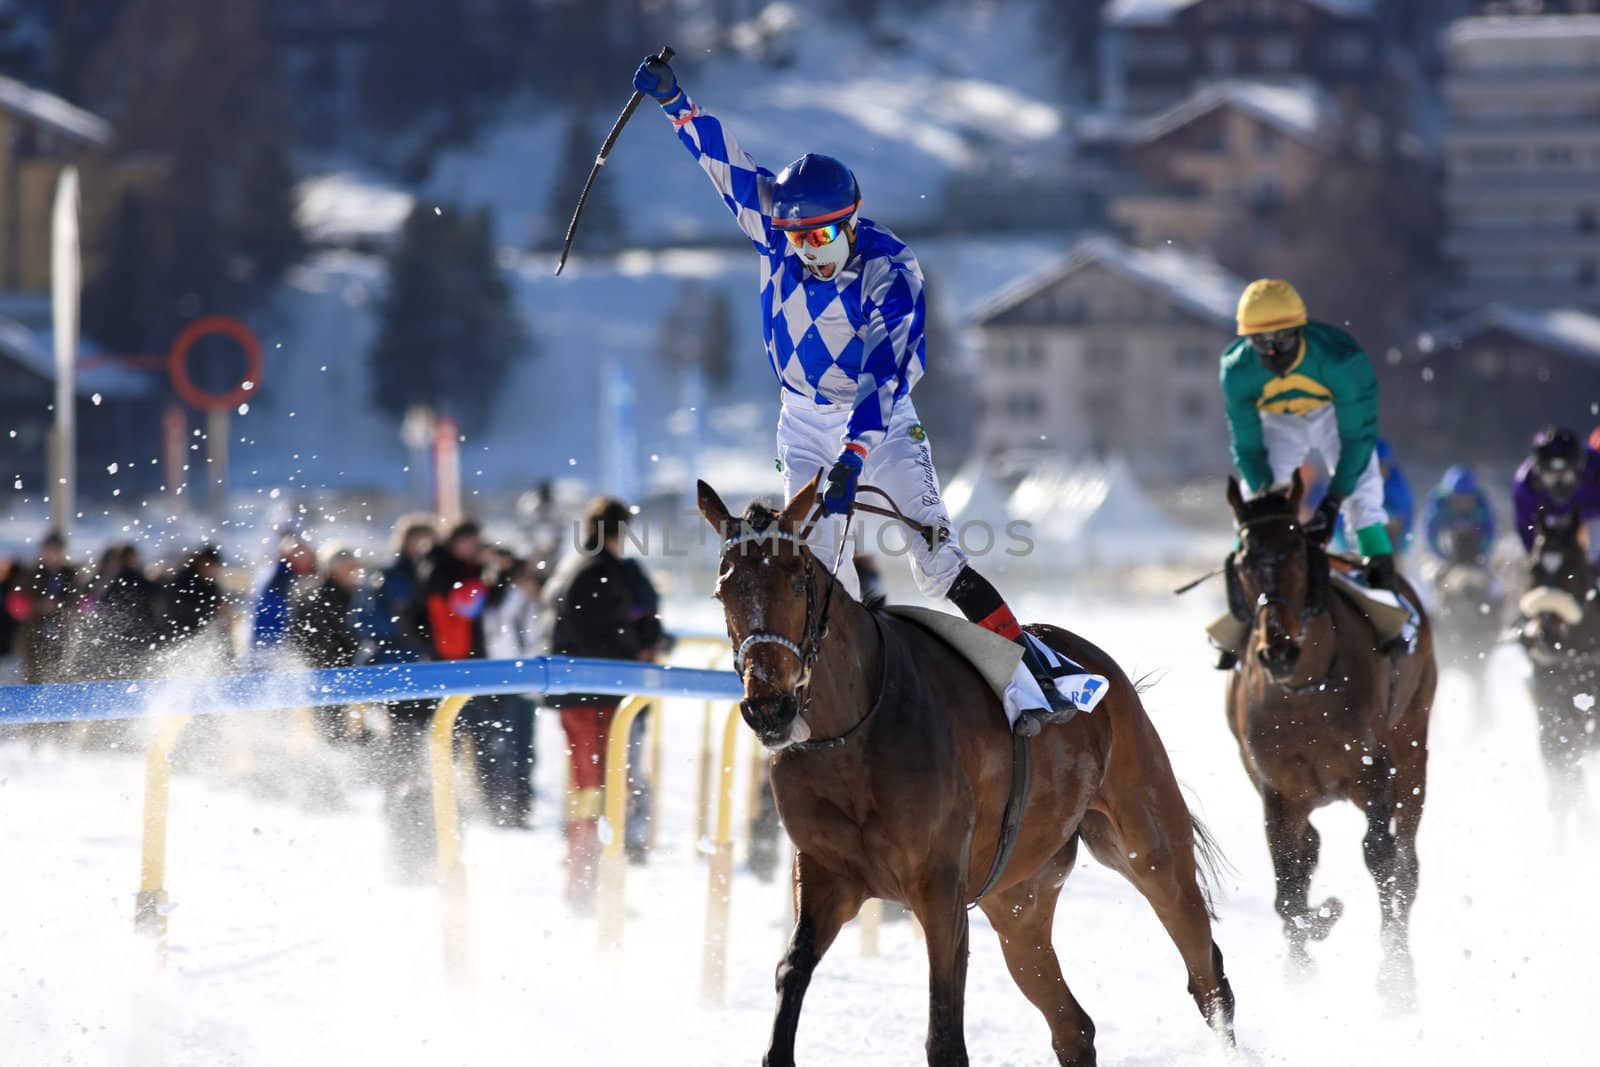 Horse Race in the snow by monner